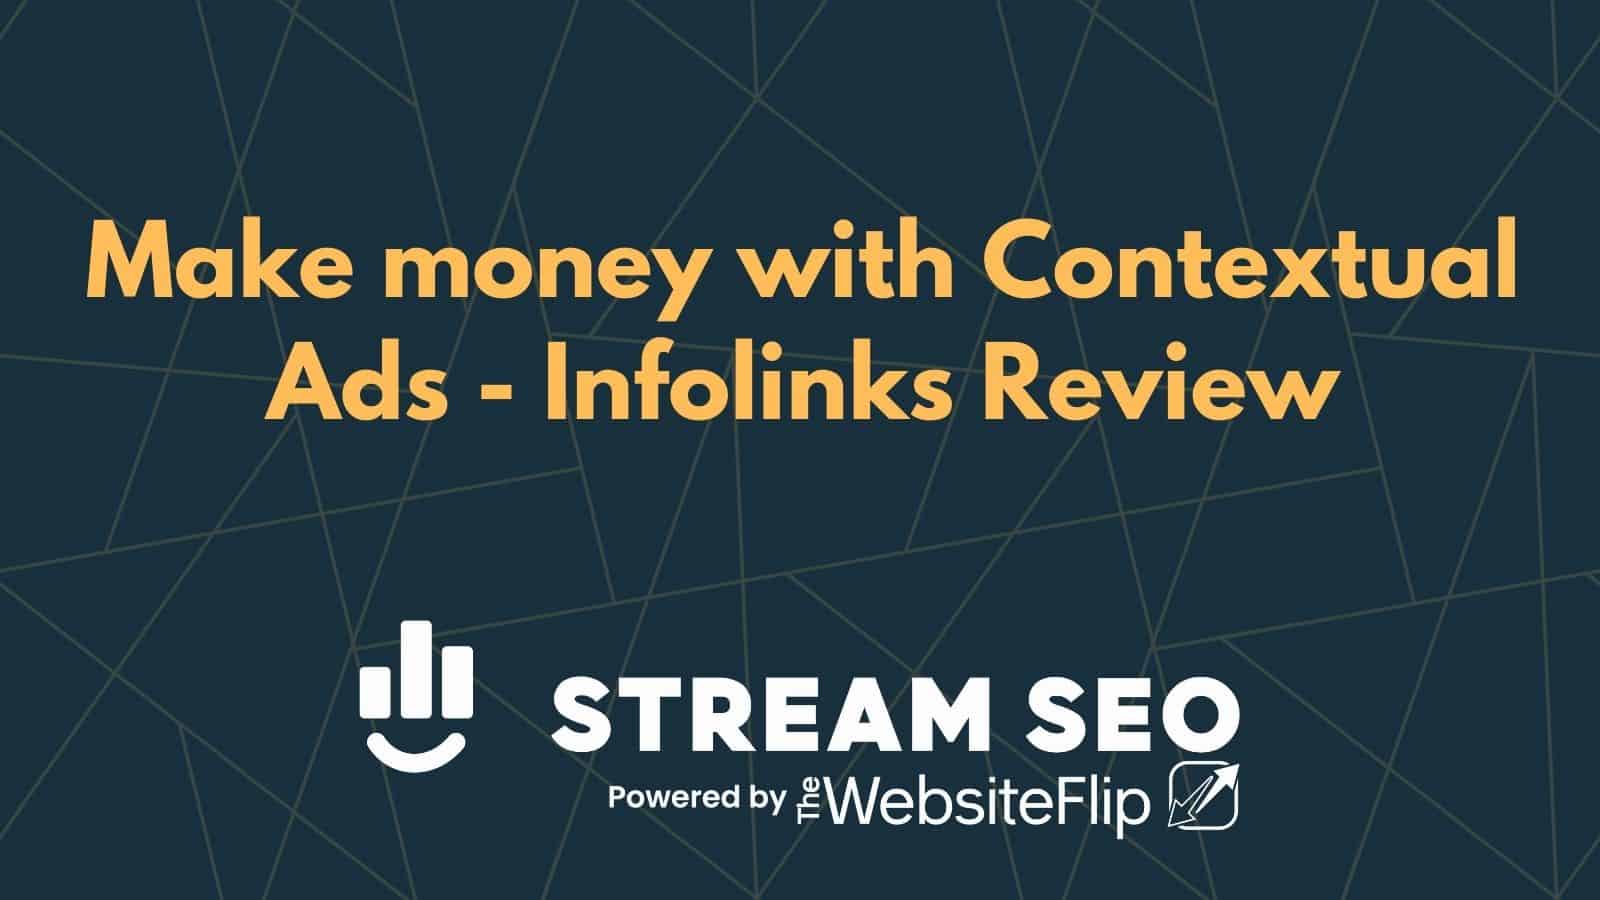 Make money with Contextual Ads – Infolinks Review